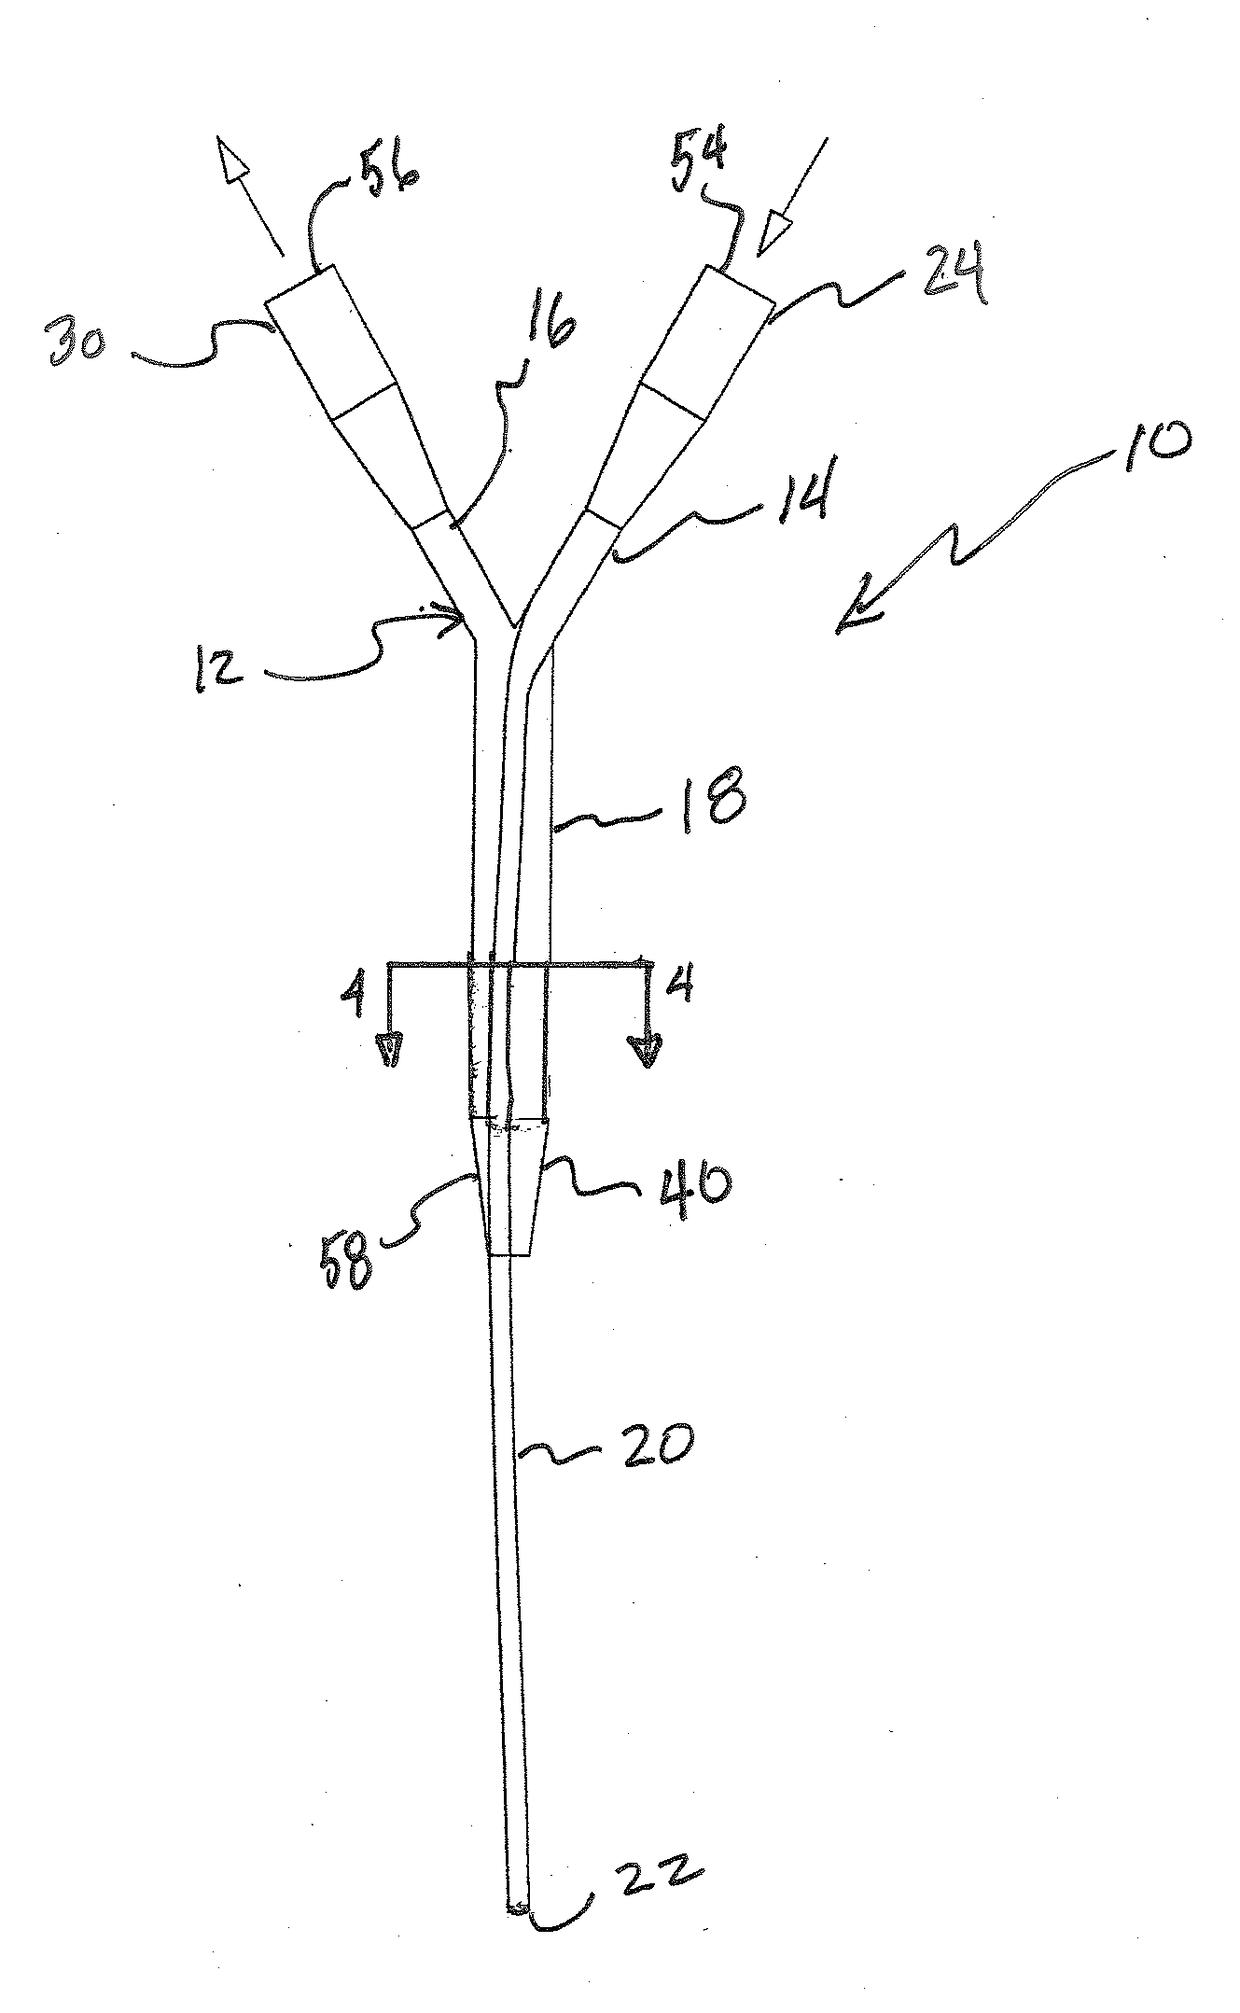 Continuous bladder irrigation adaptor for a foley catheter